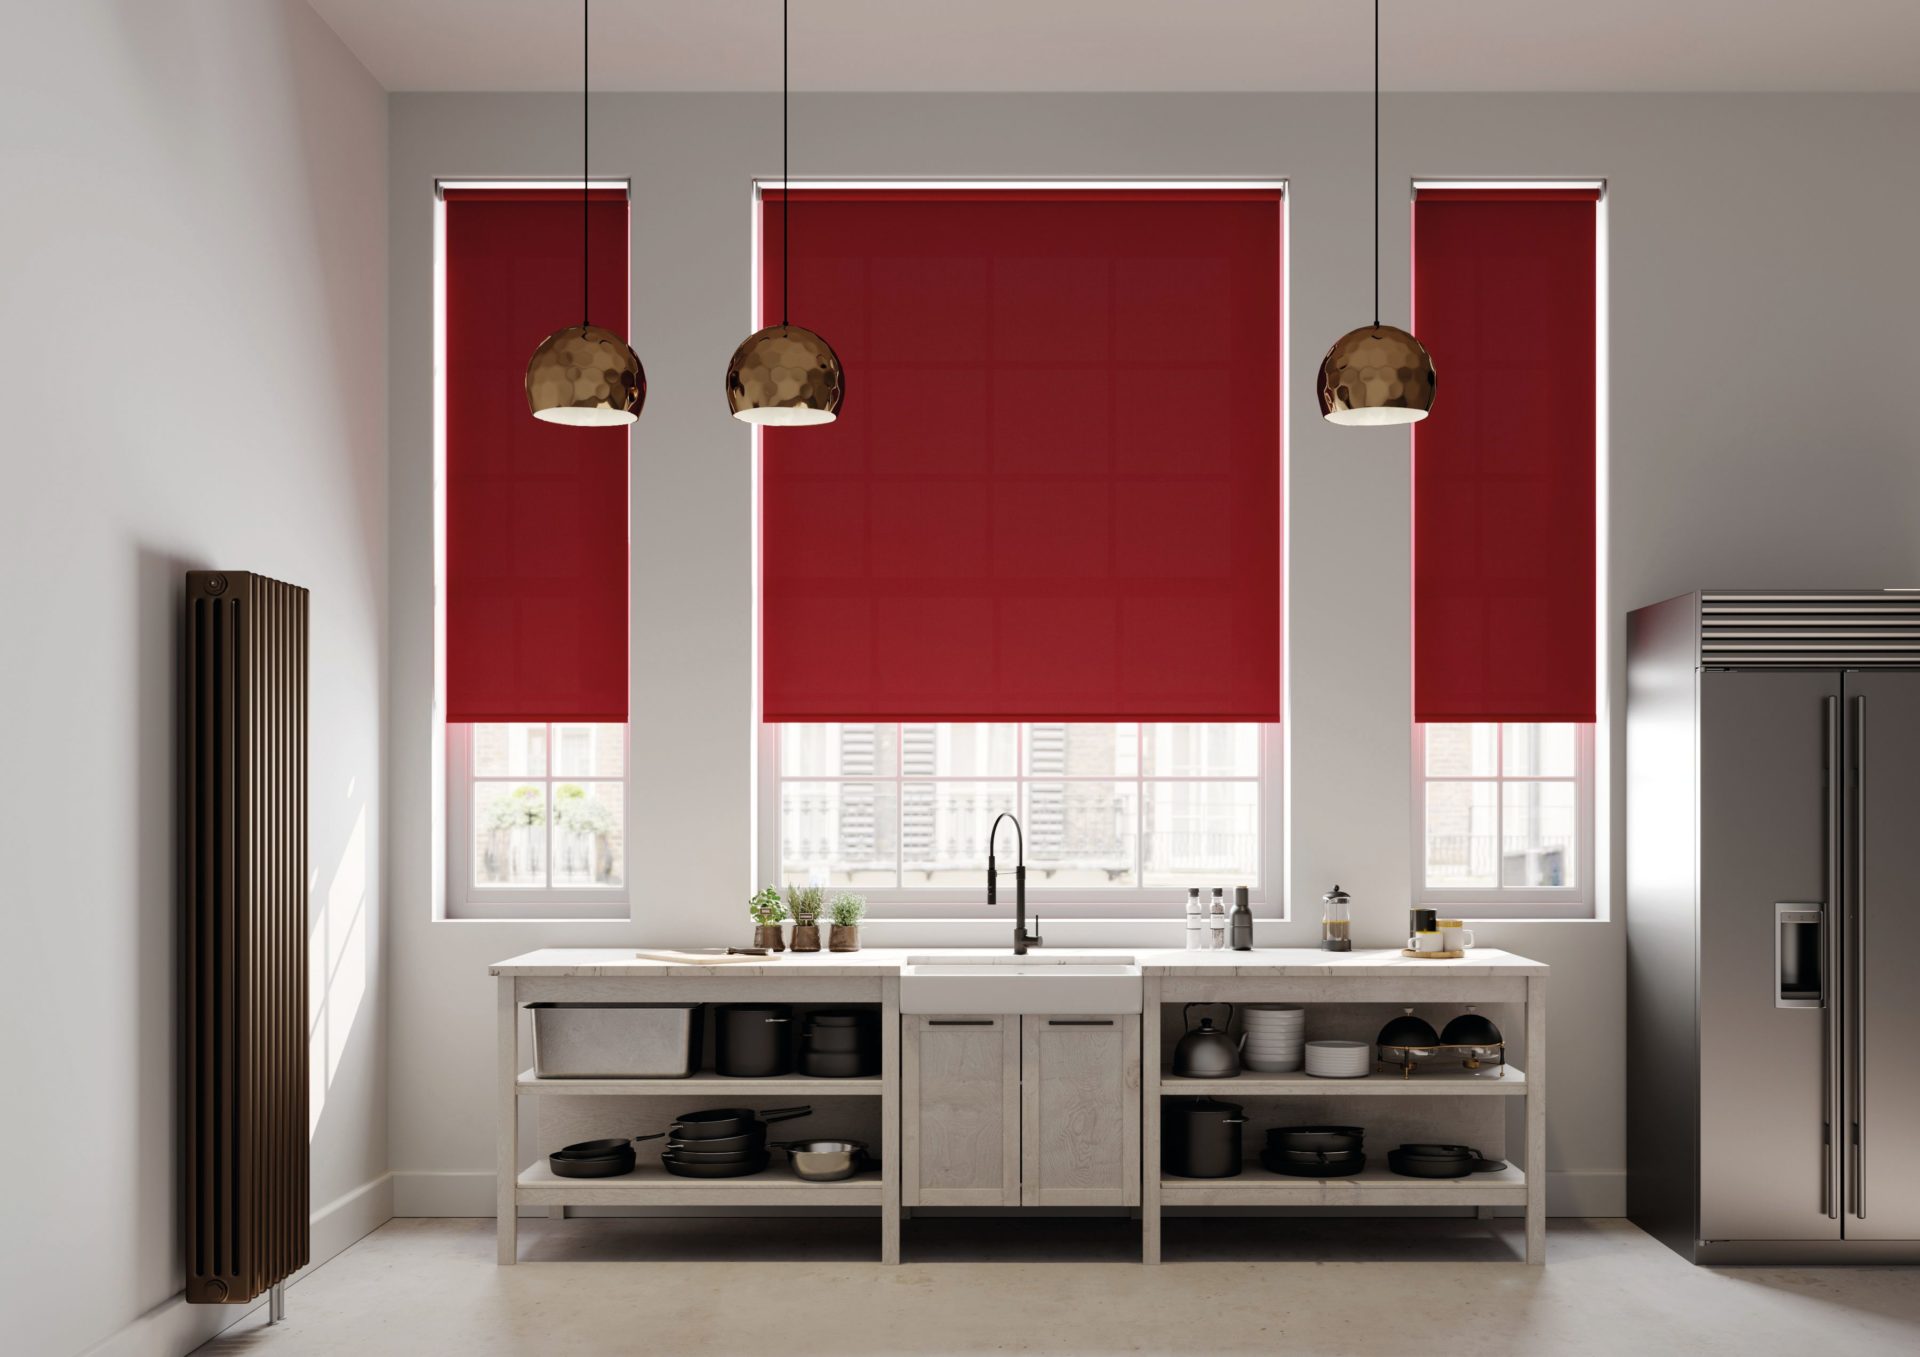 Bold red blinds